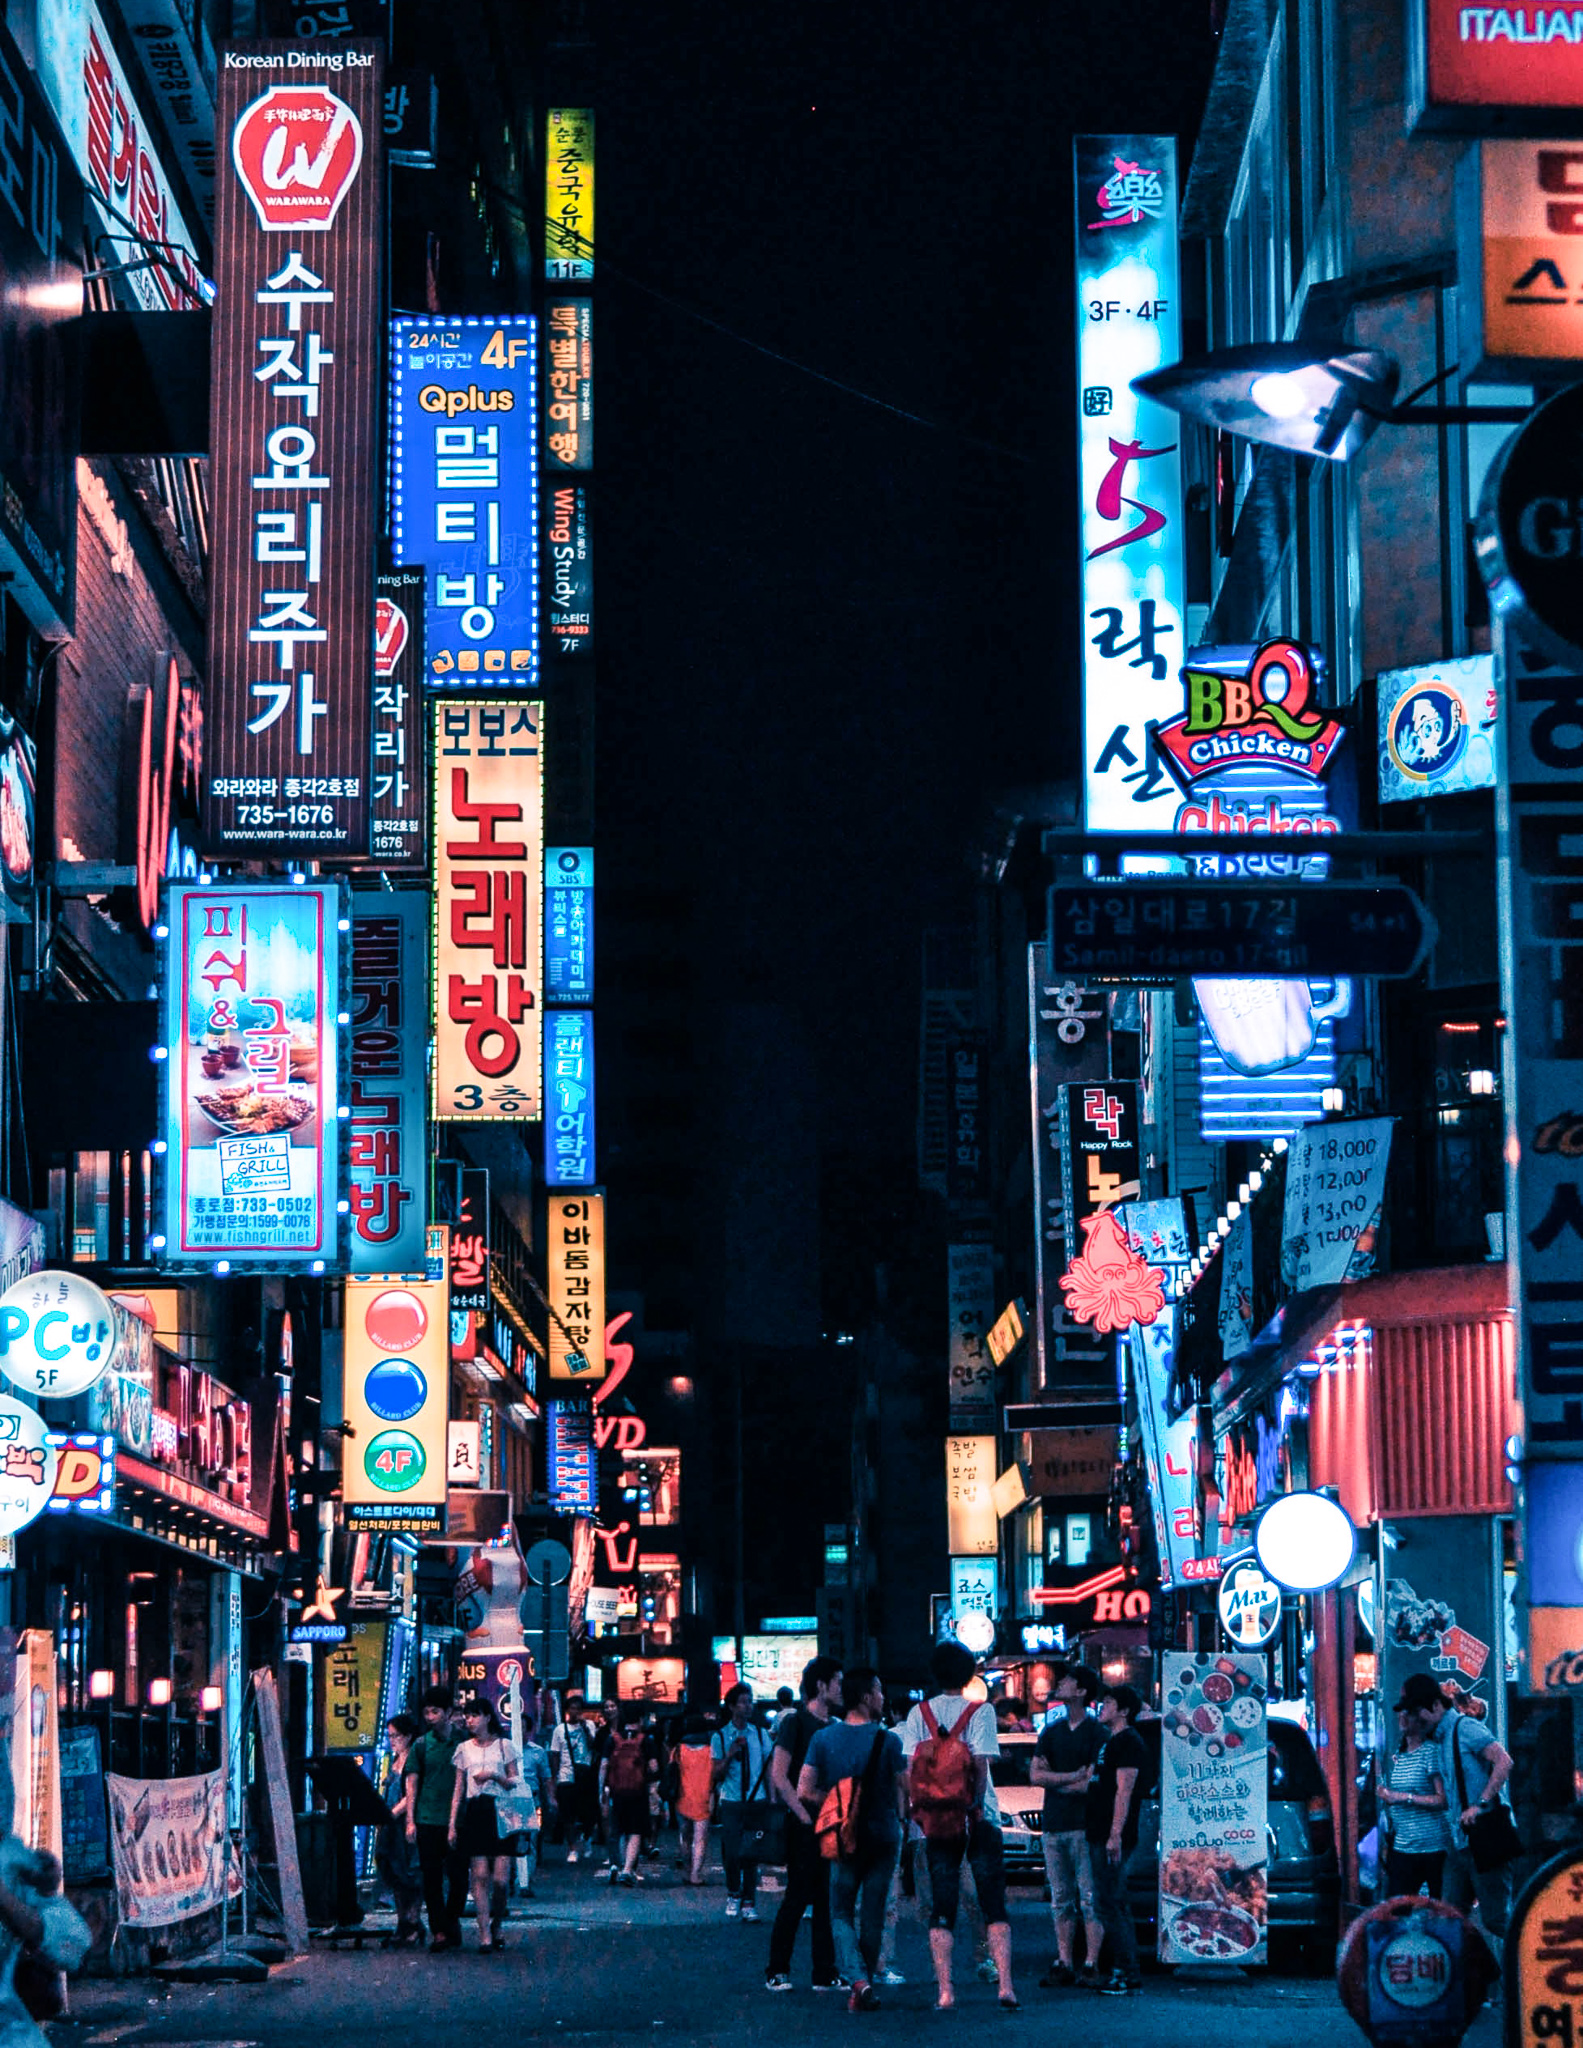 a view of a shopping street in seoul at night